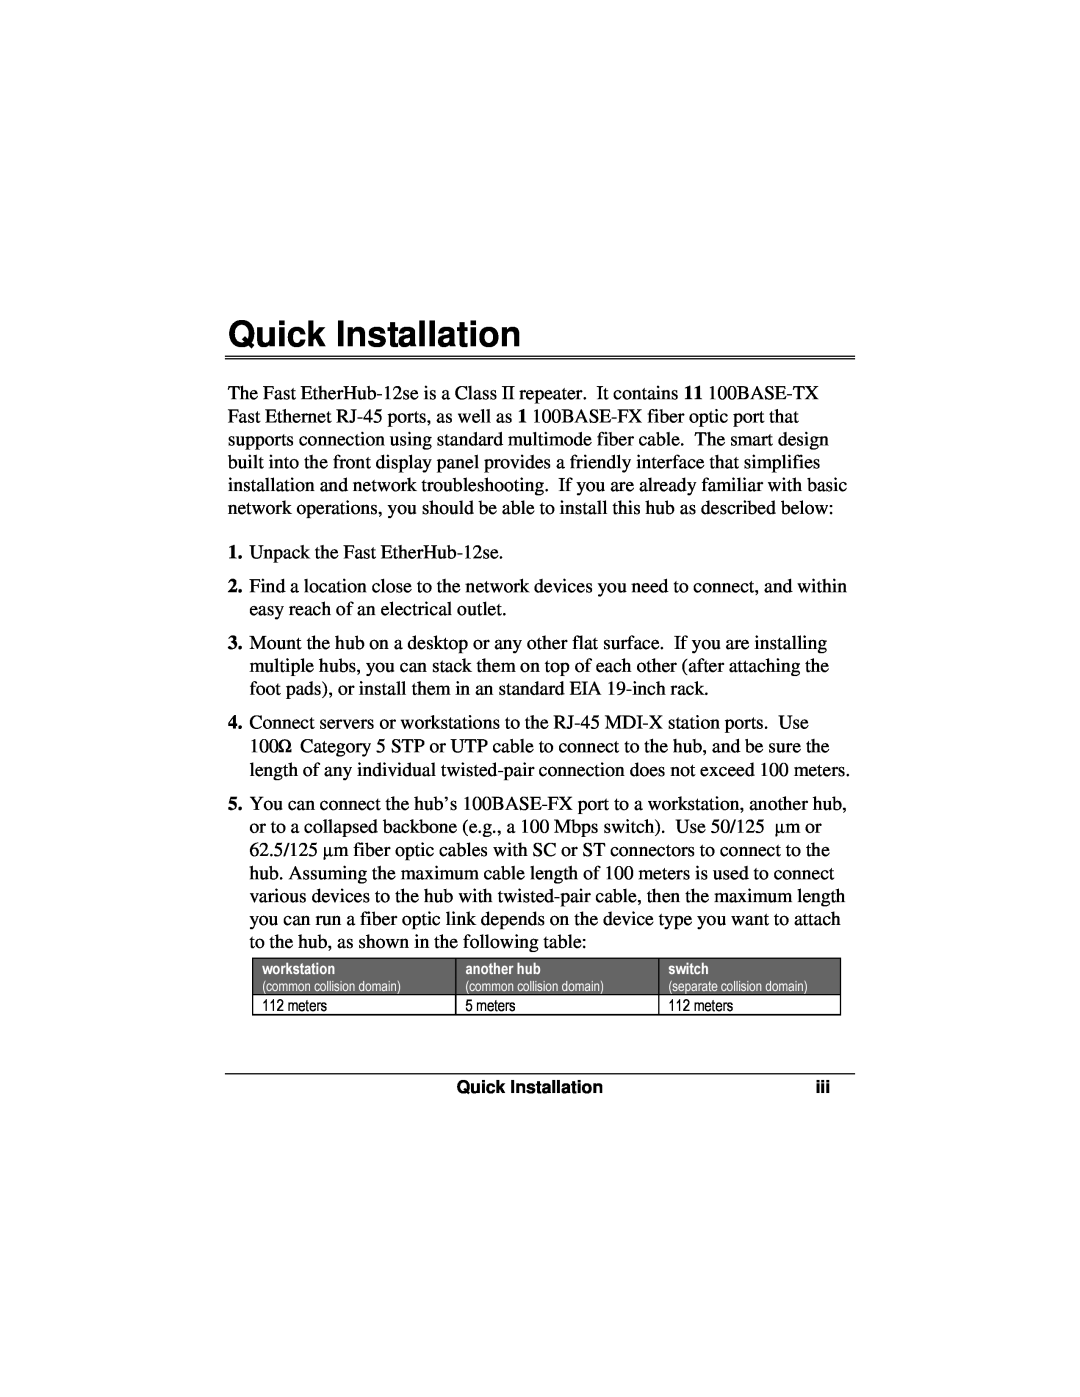 Accton Technology 12se manual Quick Installation 